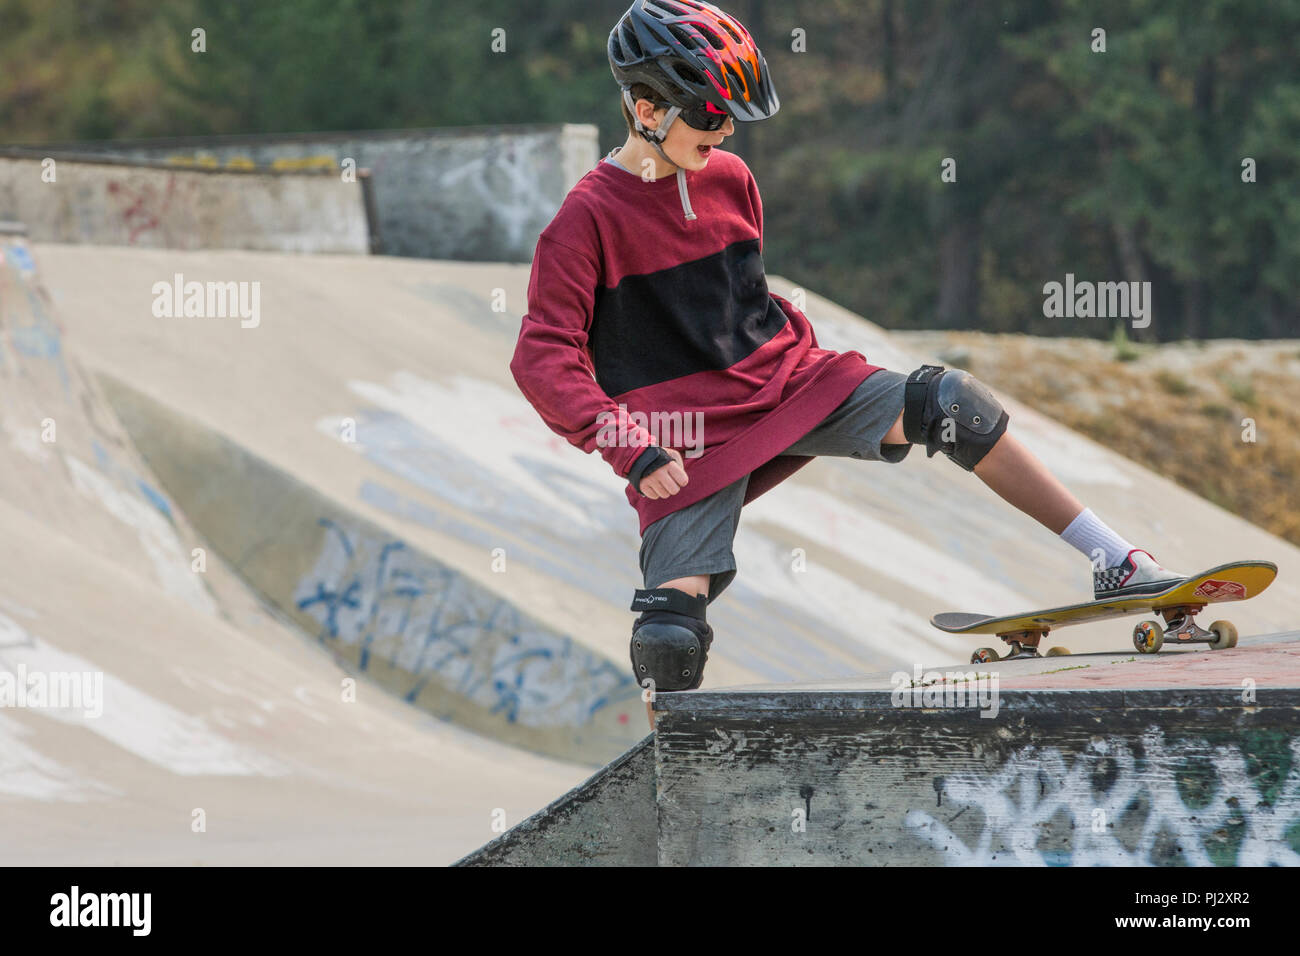 Young, 12 year old, handsome boy, wearing skateboard equipment and  skateboarding. Colorful helmet, knee pads, elbow pads, shorts, Model  Released Stock Photo - Alamy